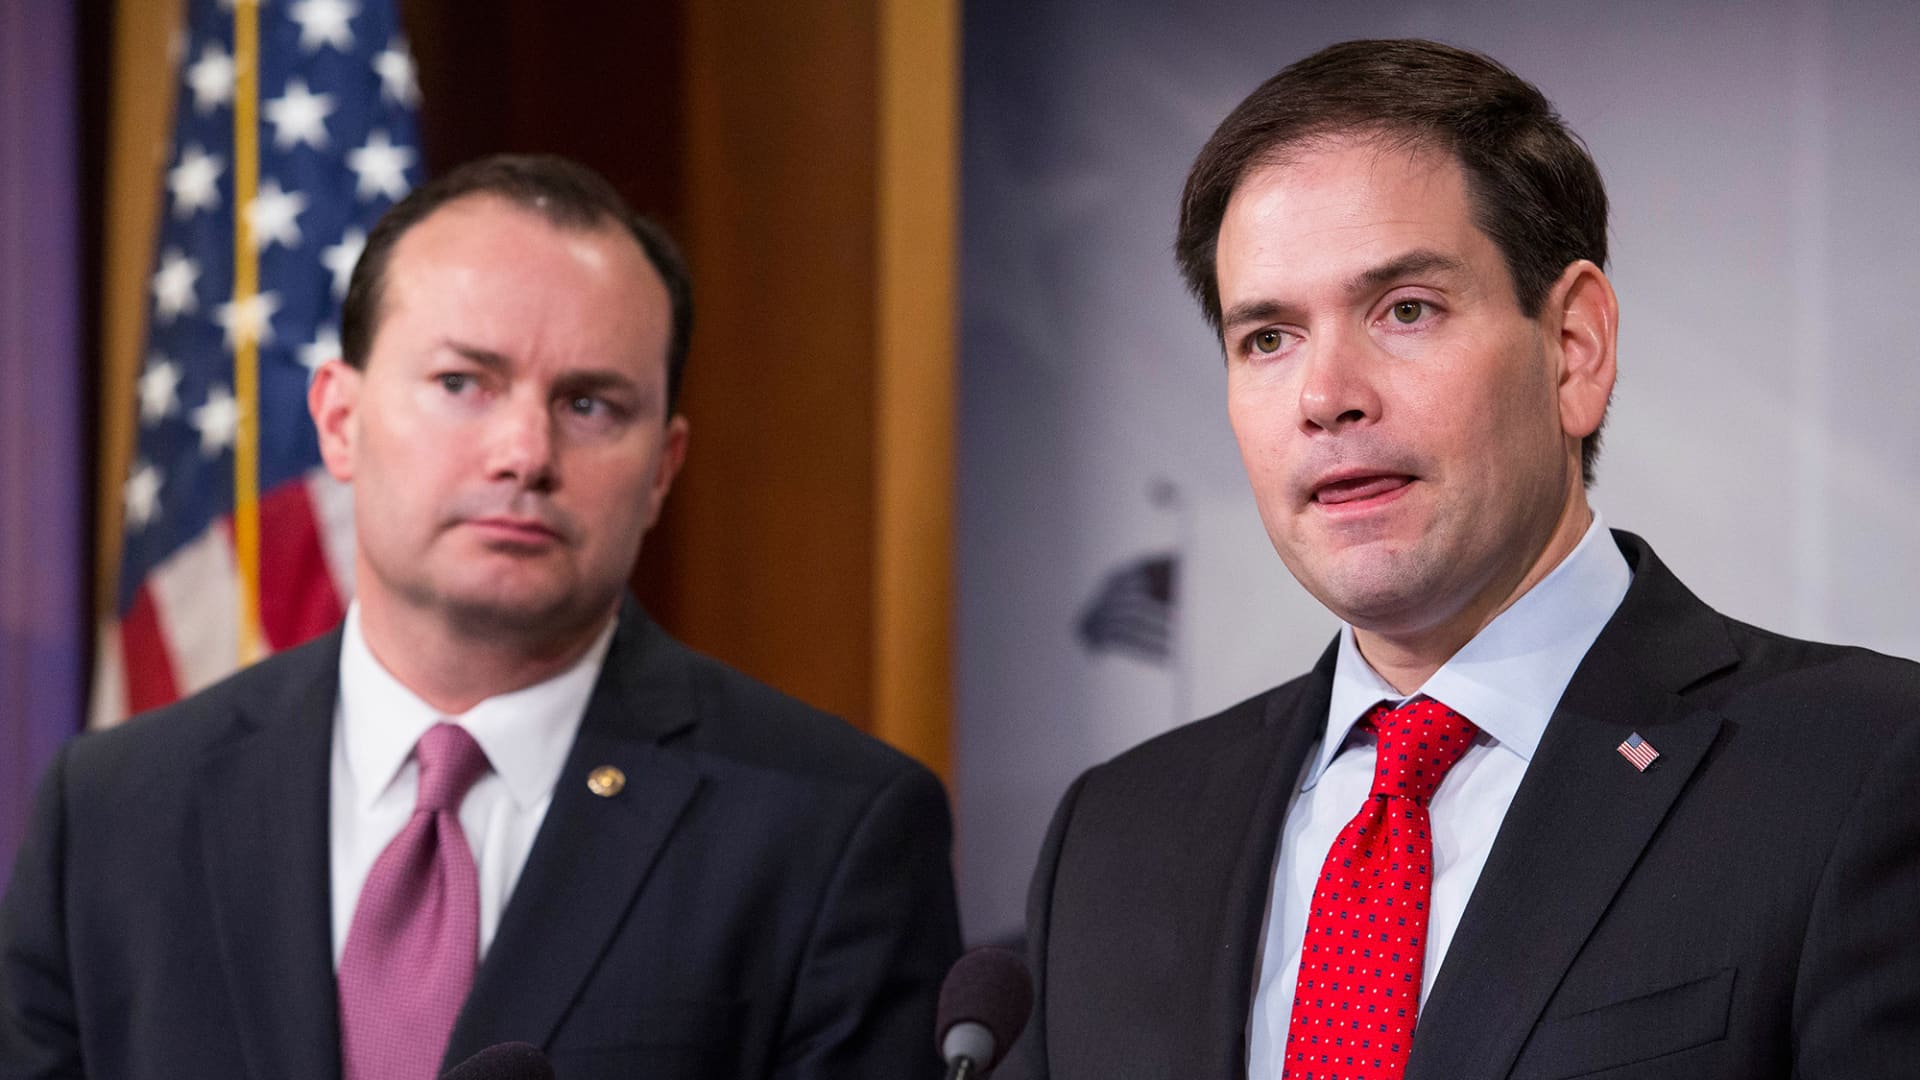 Sen. Mike Lee, R-Utah, (left) and Sen. Marco Rubio, R-Fla., at a March 4, 2015 Capitol Hill news conference to introduce their proposal for an overhaul of the tax code.